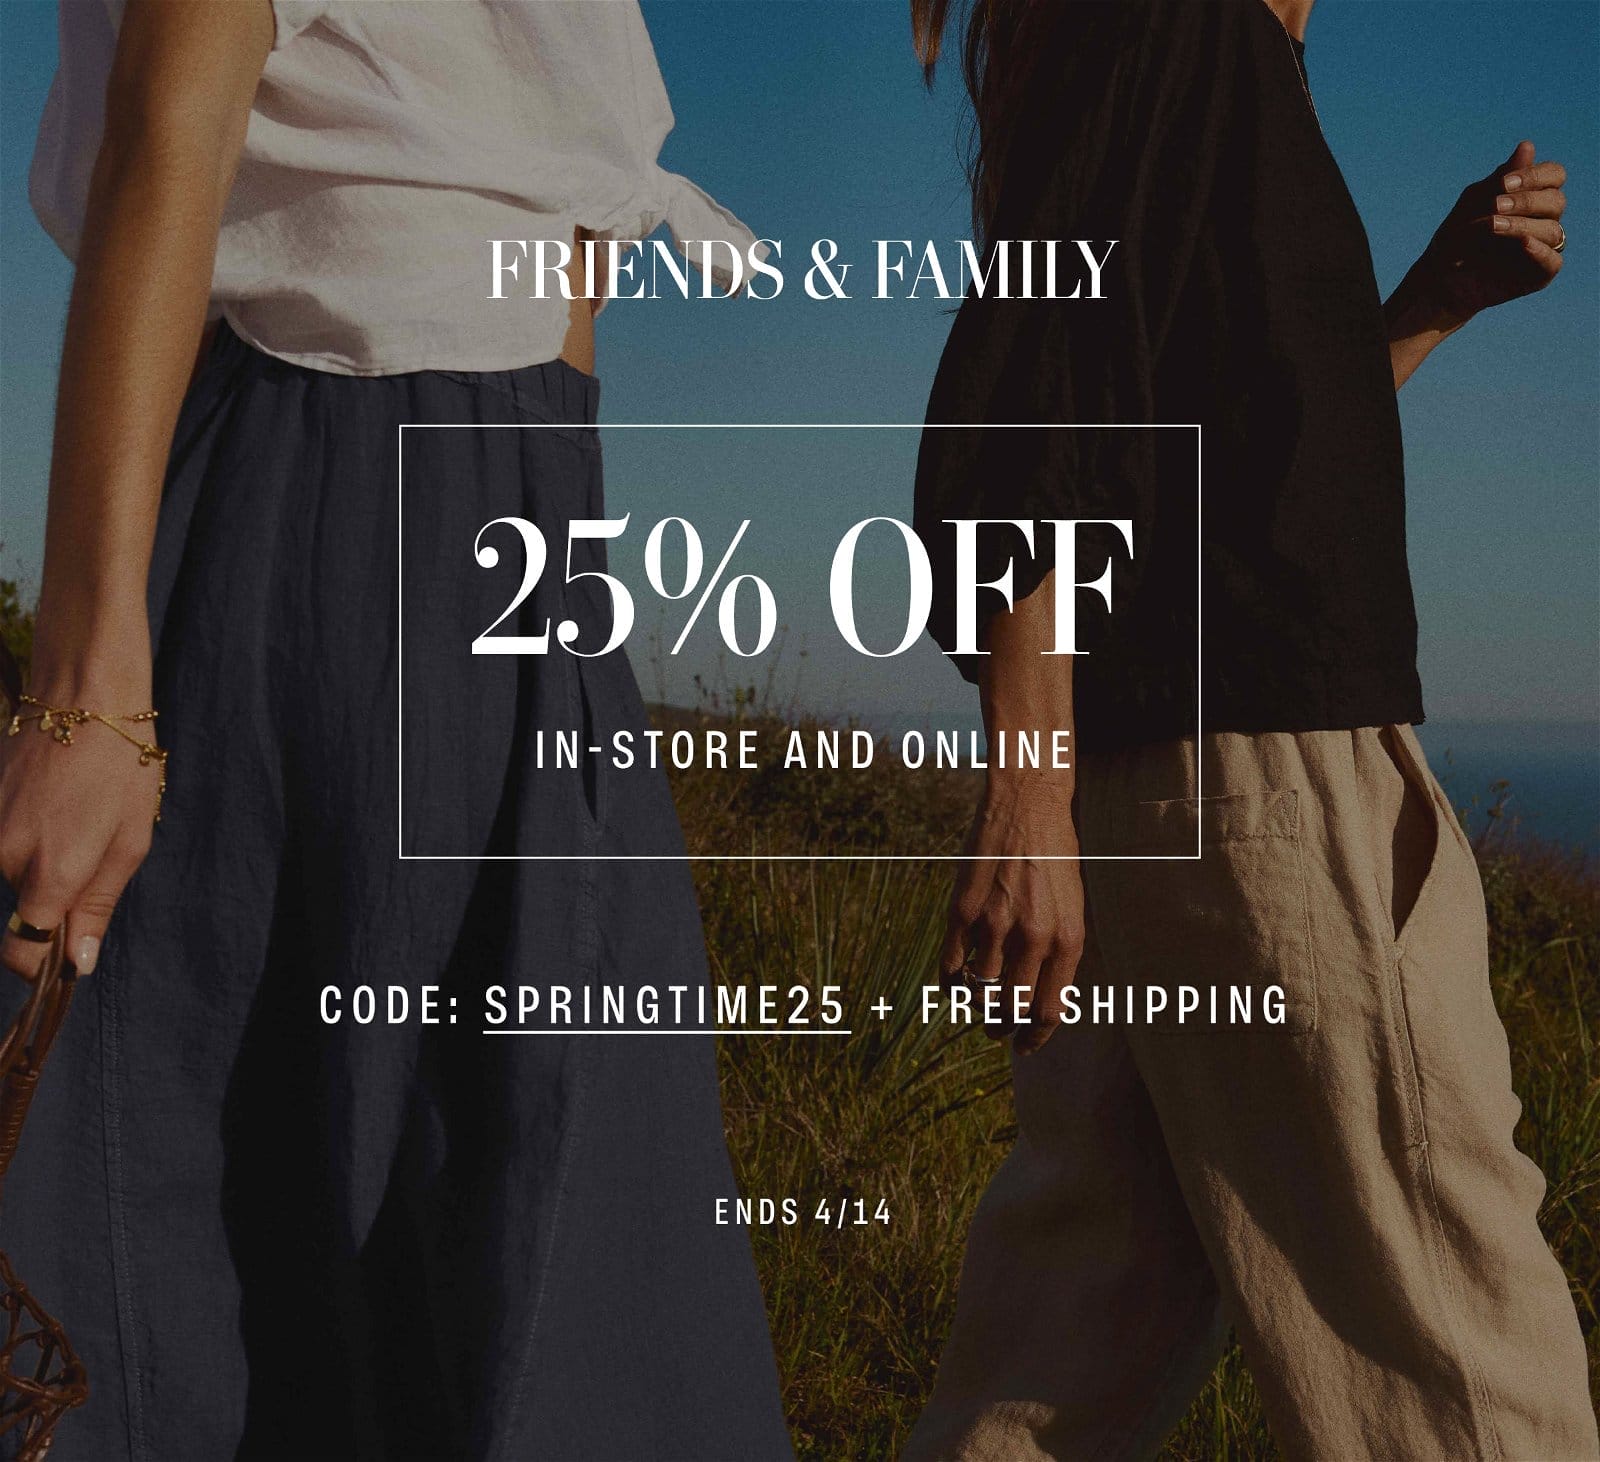 FRIENDS & FAMILY! 25% OFF IN-STORE AND ONLINE. CODE: SPRINGTIME25 + FREE SHIPPING. ENDS 4/14